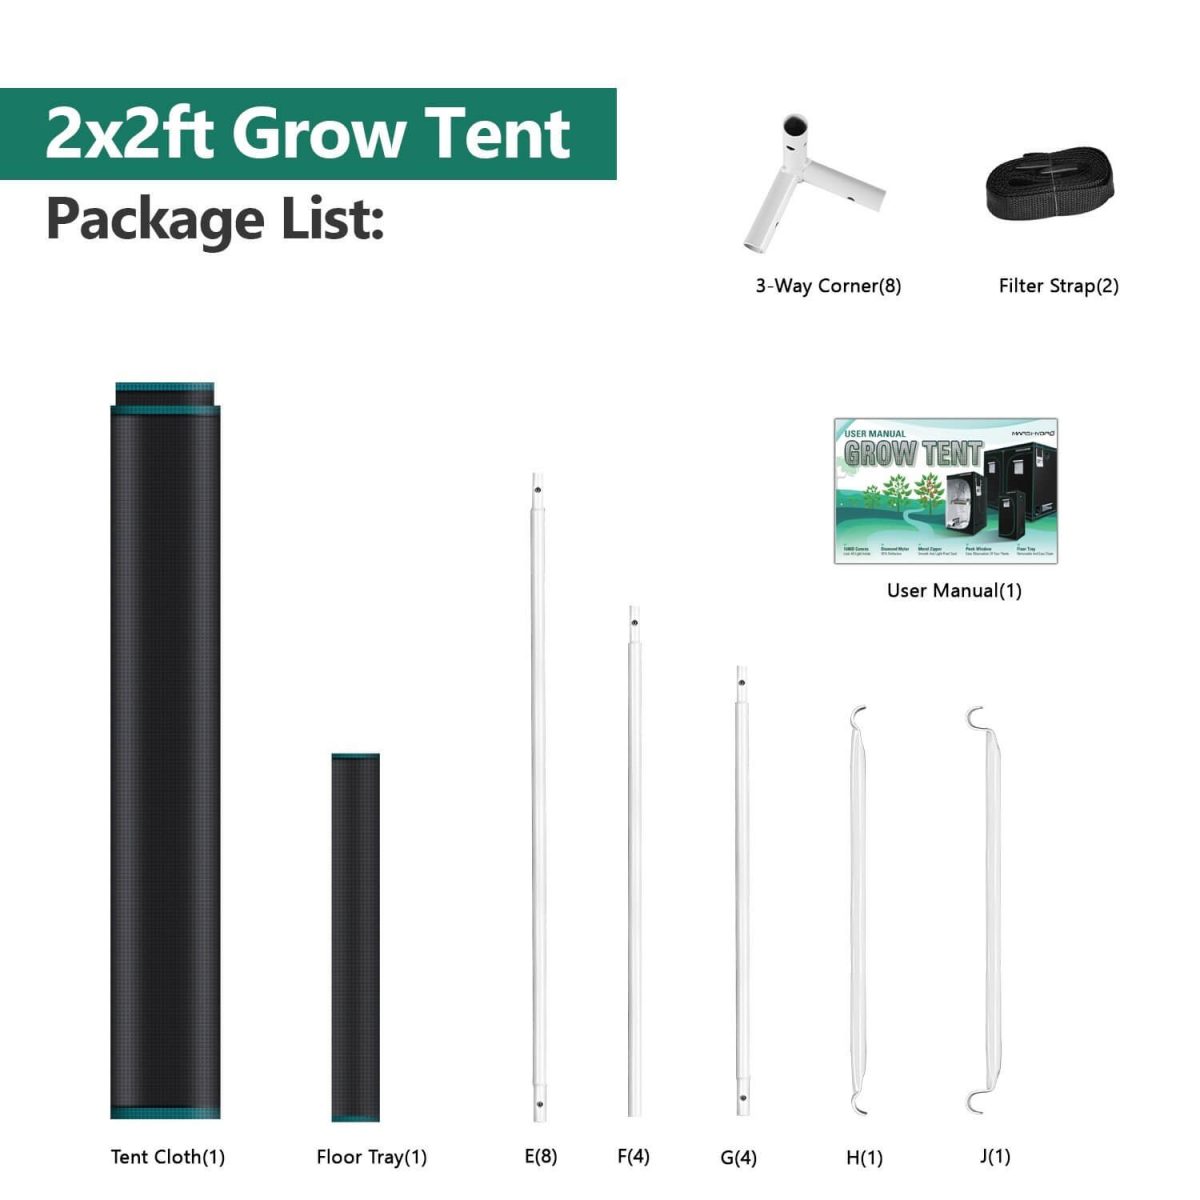 In tent package, you will receive user manual, corner, filter strap, cloth floor tray and the bars